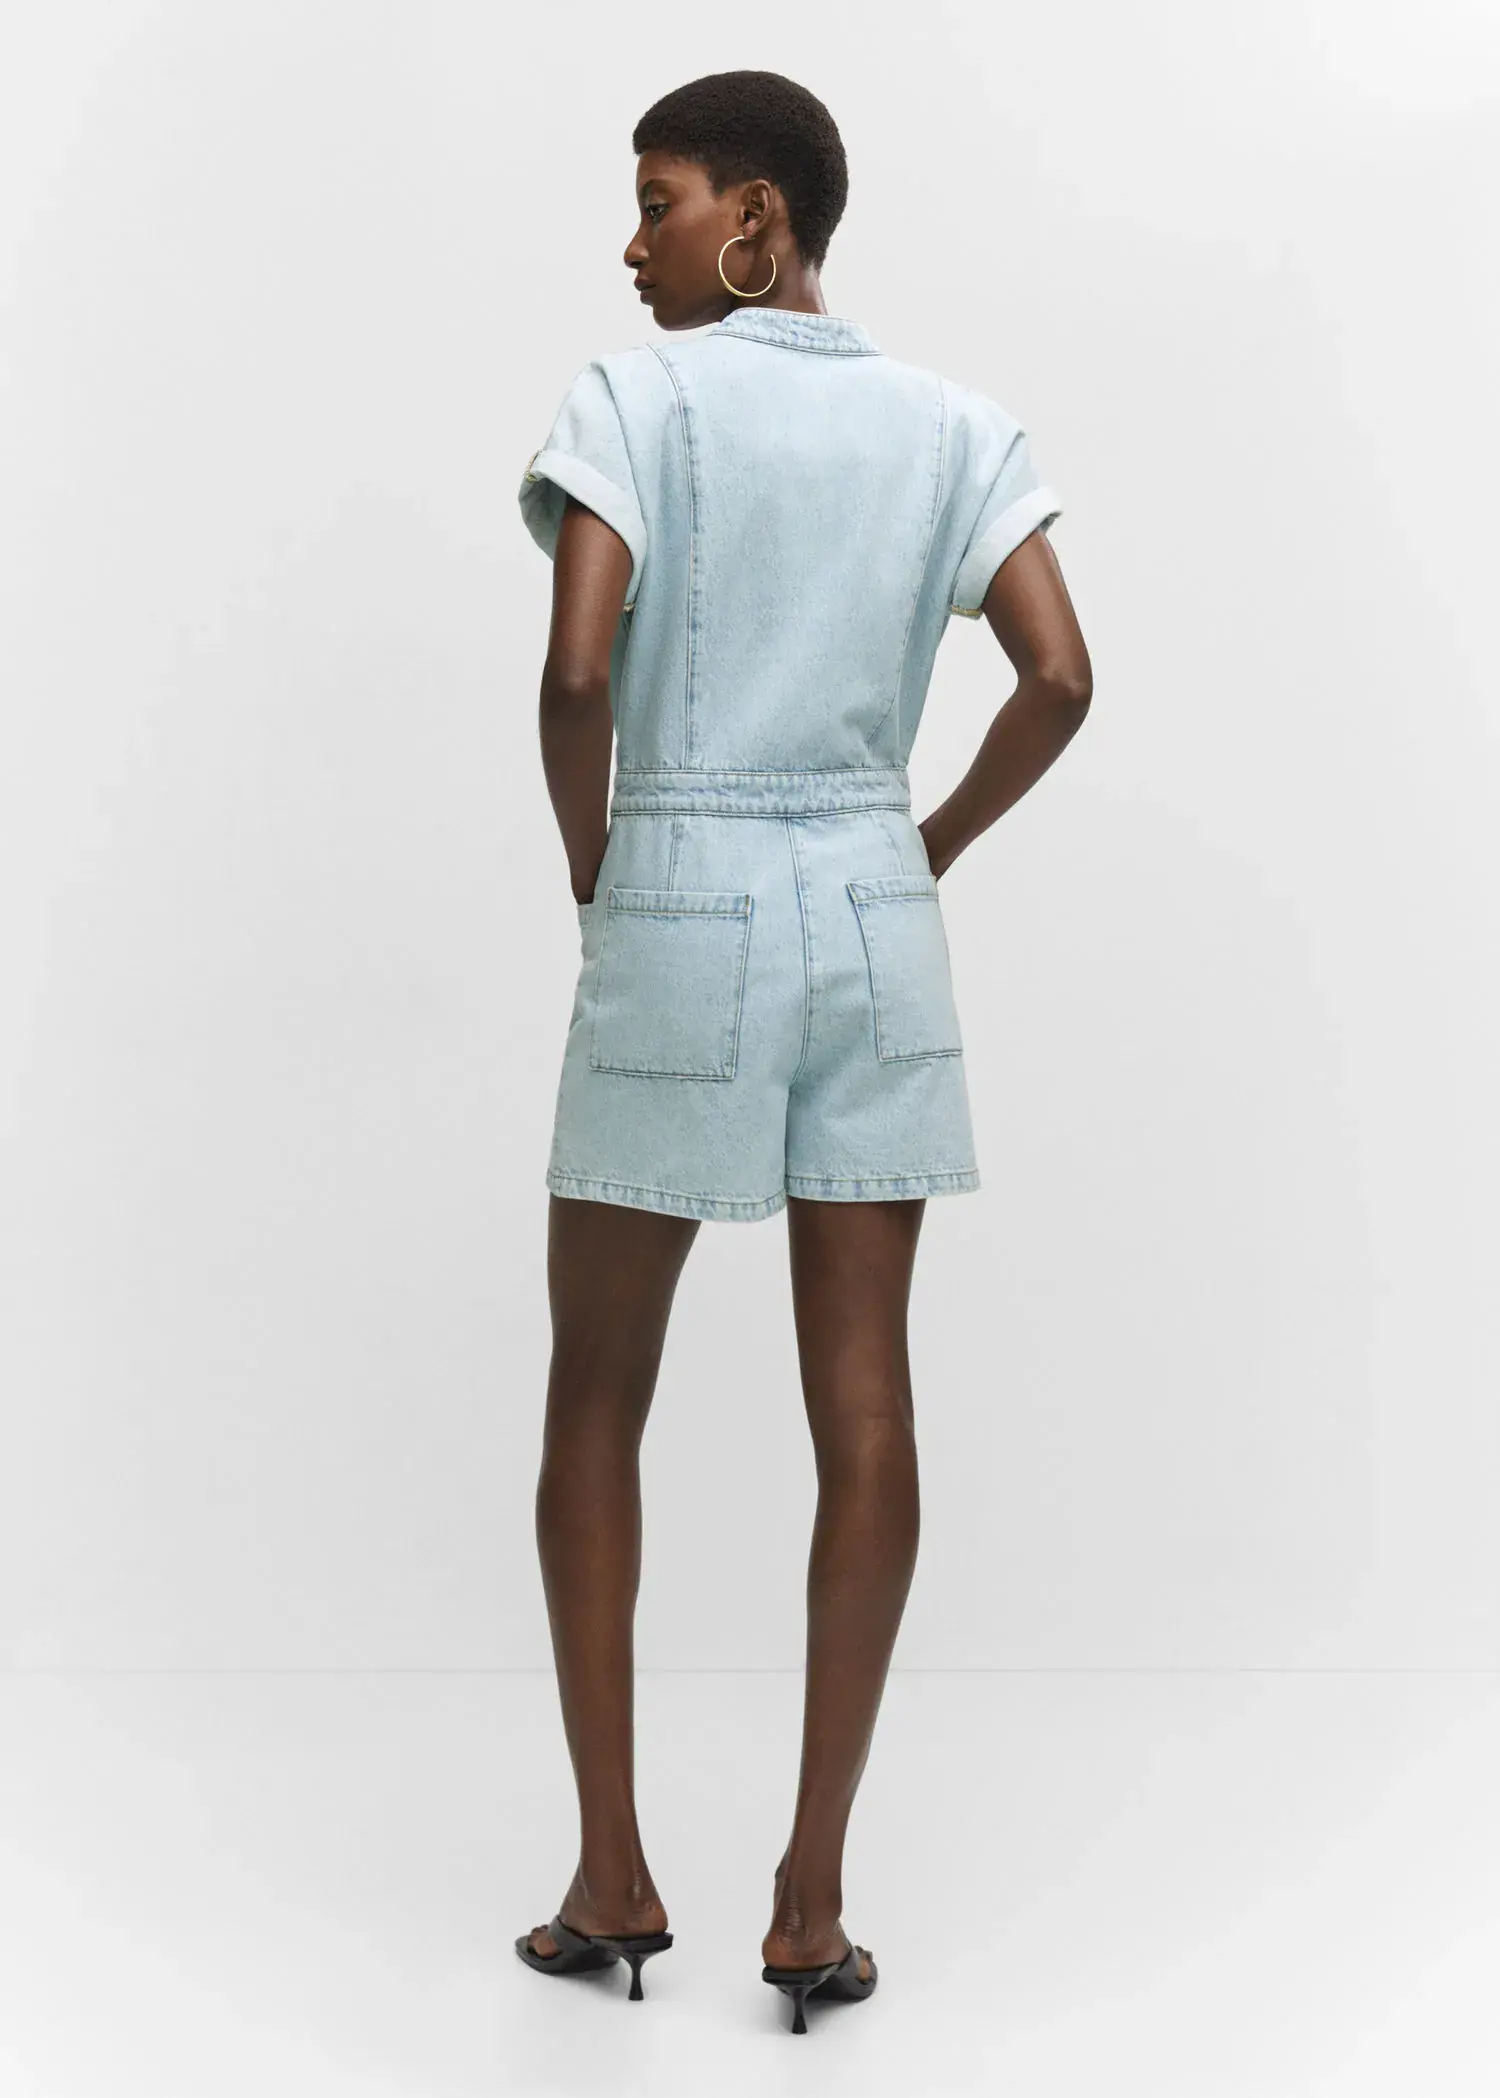 Mango Denim jumpsuit with pockets. a person wearing a light blue outfit standing in a room. 